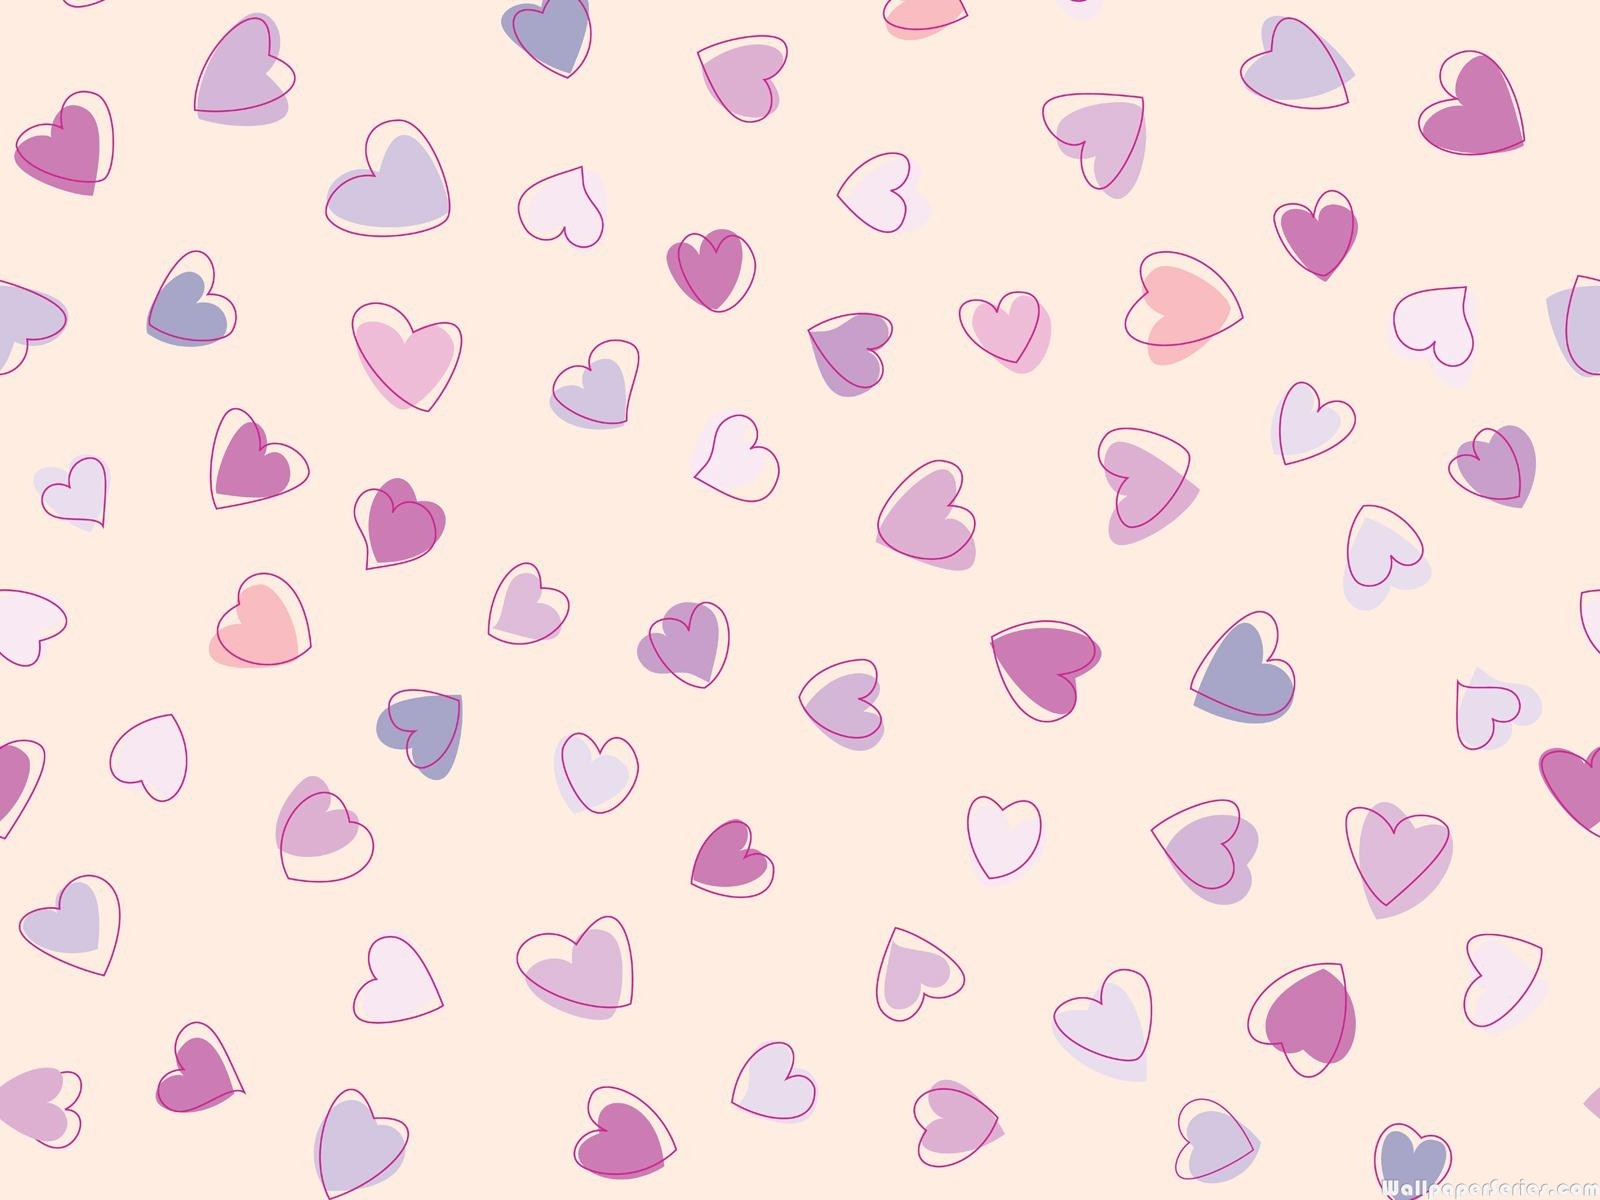 Gallery For Gt Cute Heart Background